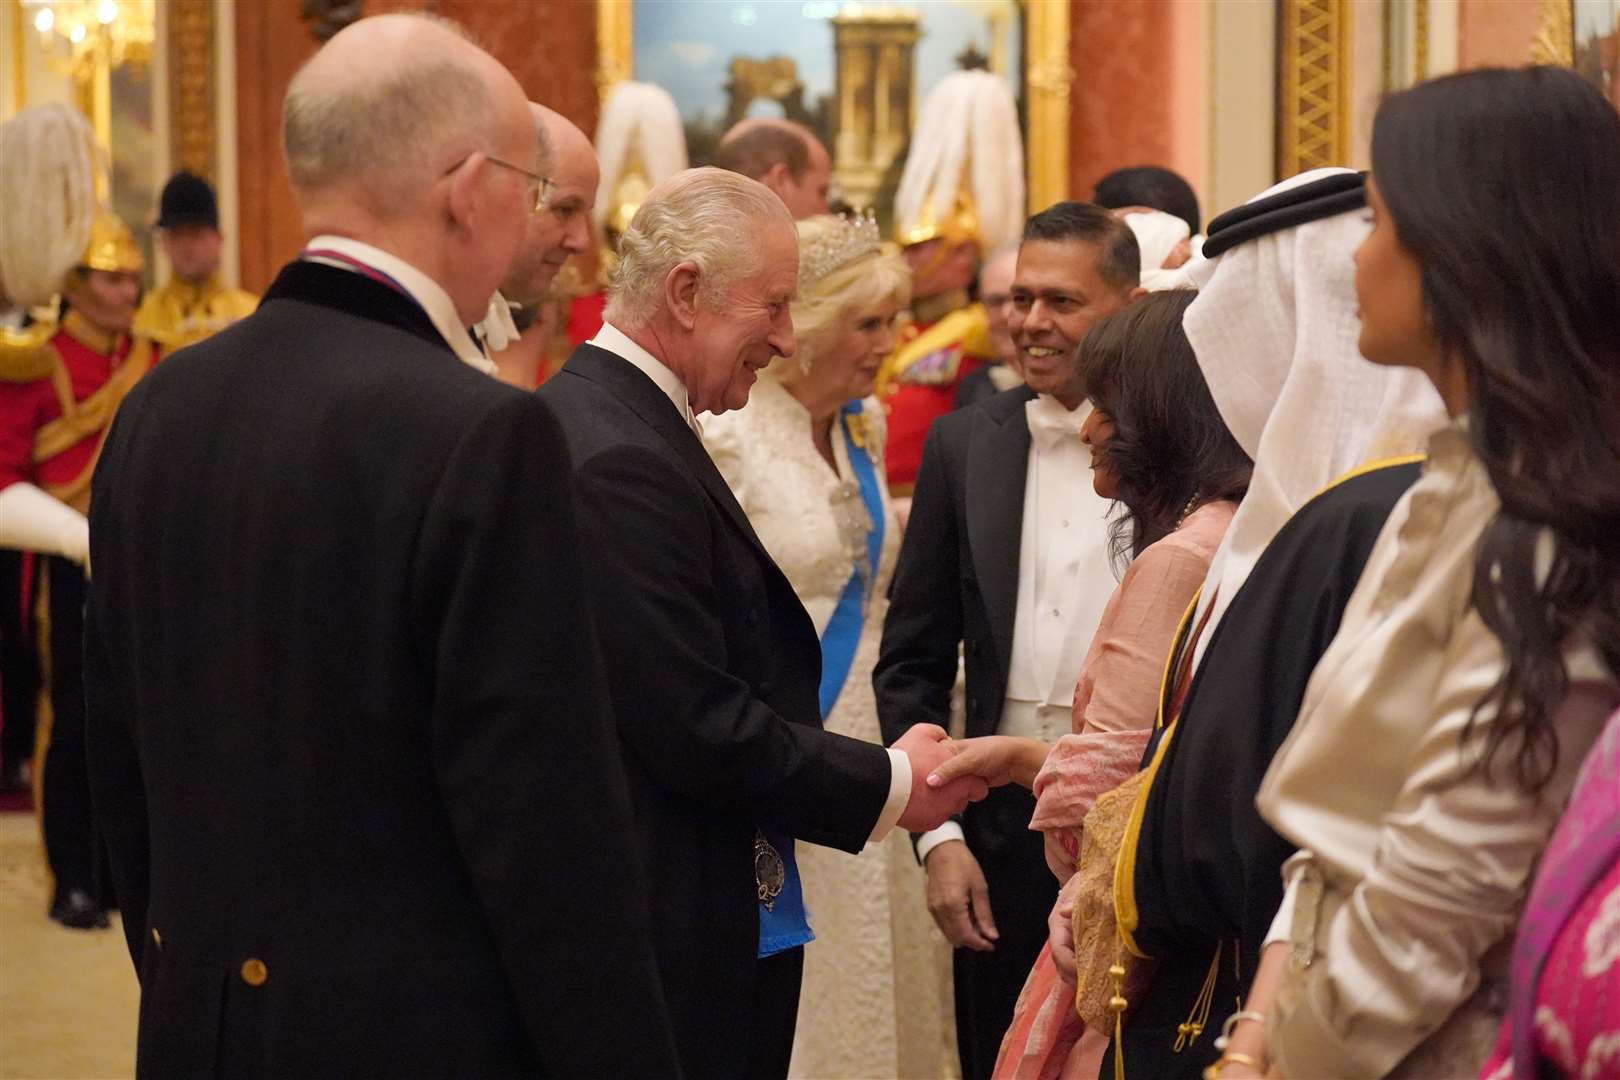 The King and Queen greeted guests at the evening reception (Jonathan Brady/PA)